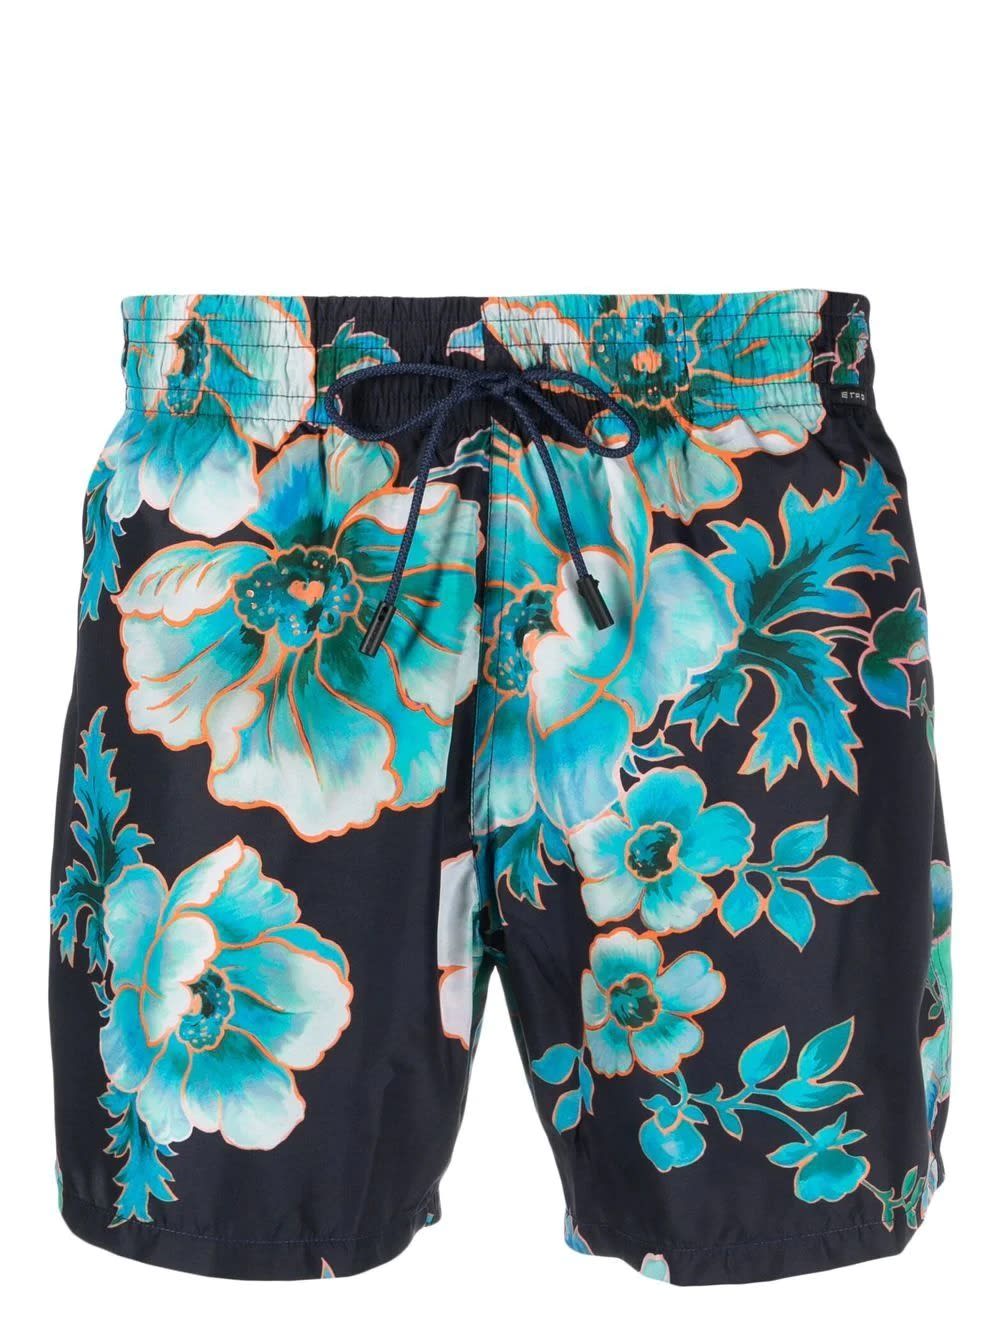 ETRO NAVY BLUE SWIM SHORTS WITH MAXI FLORAL PRINT